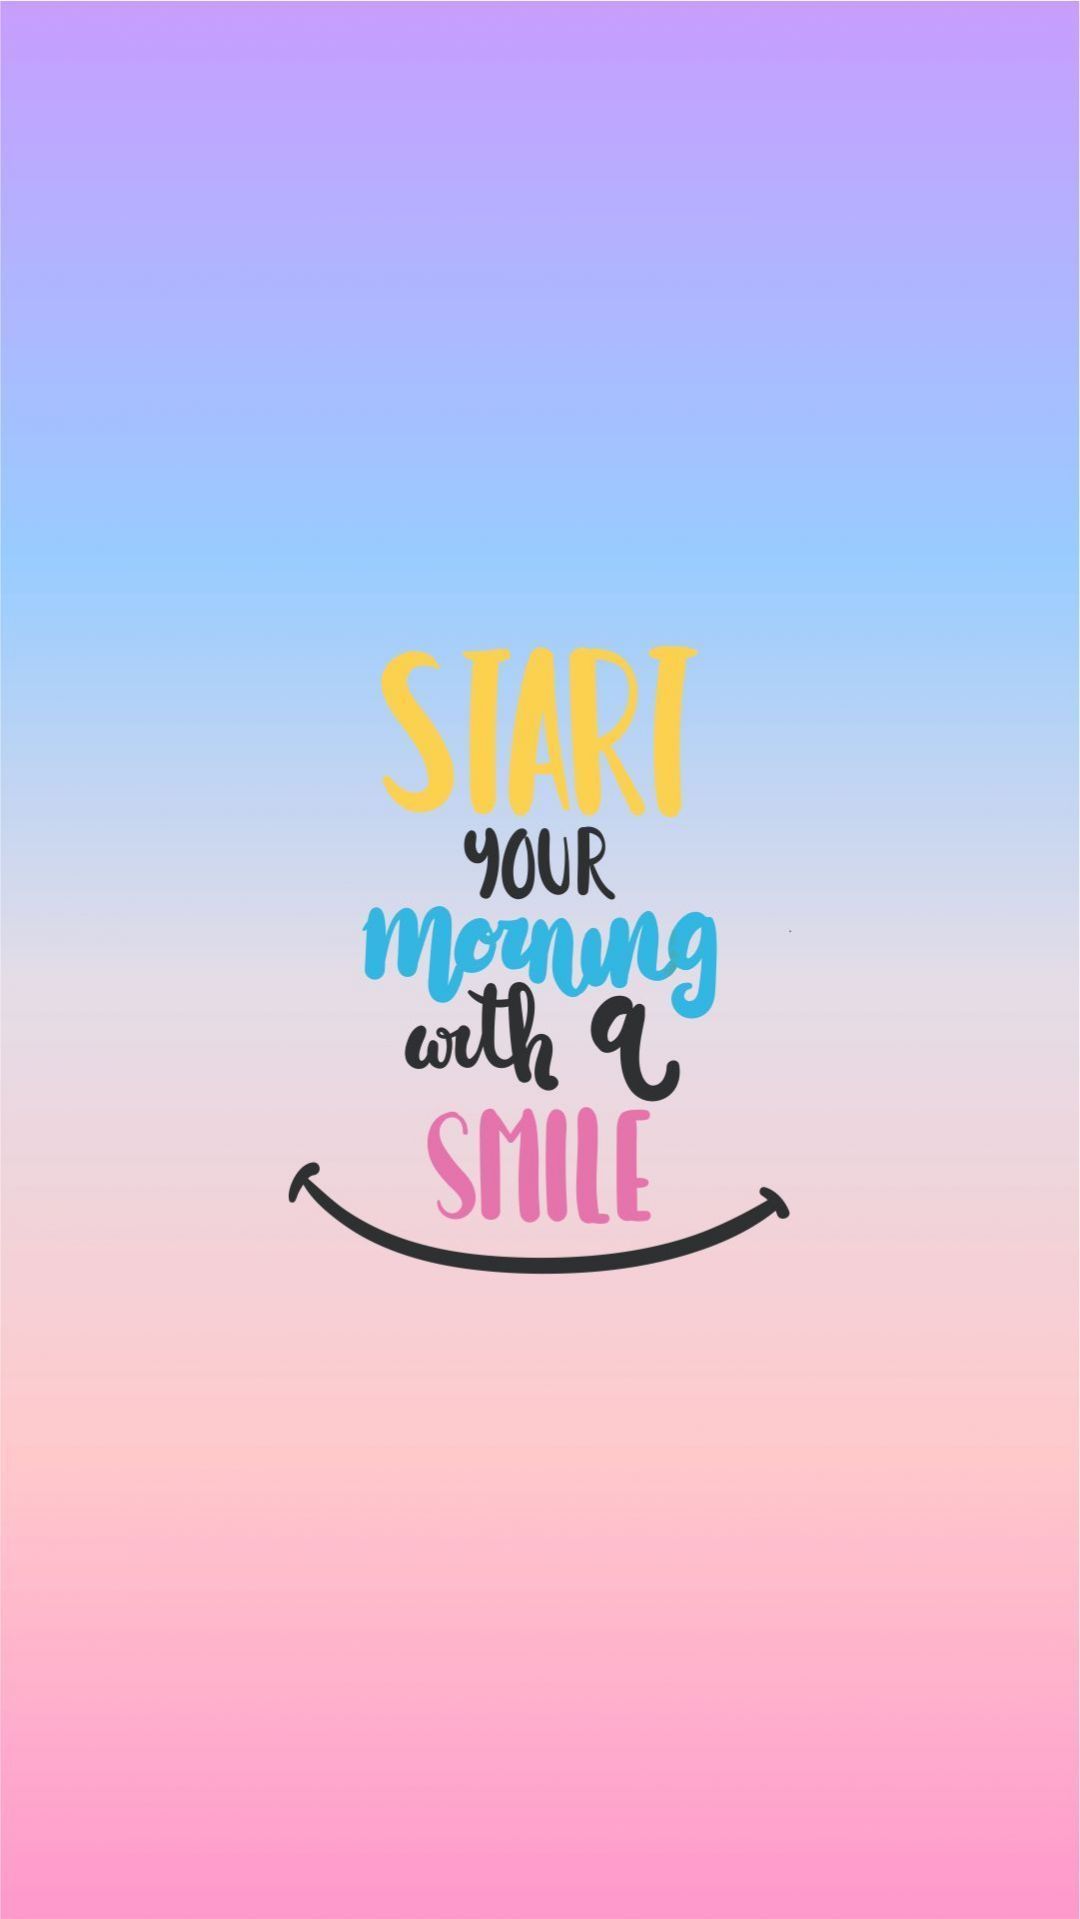 Start your morning with a smile quote - Positivity, smile, positive